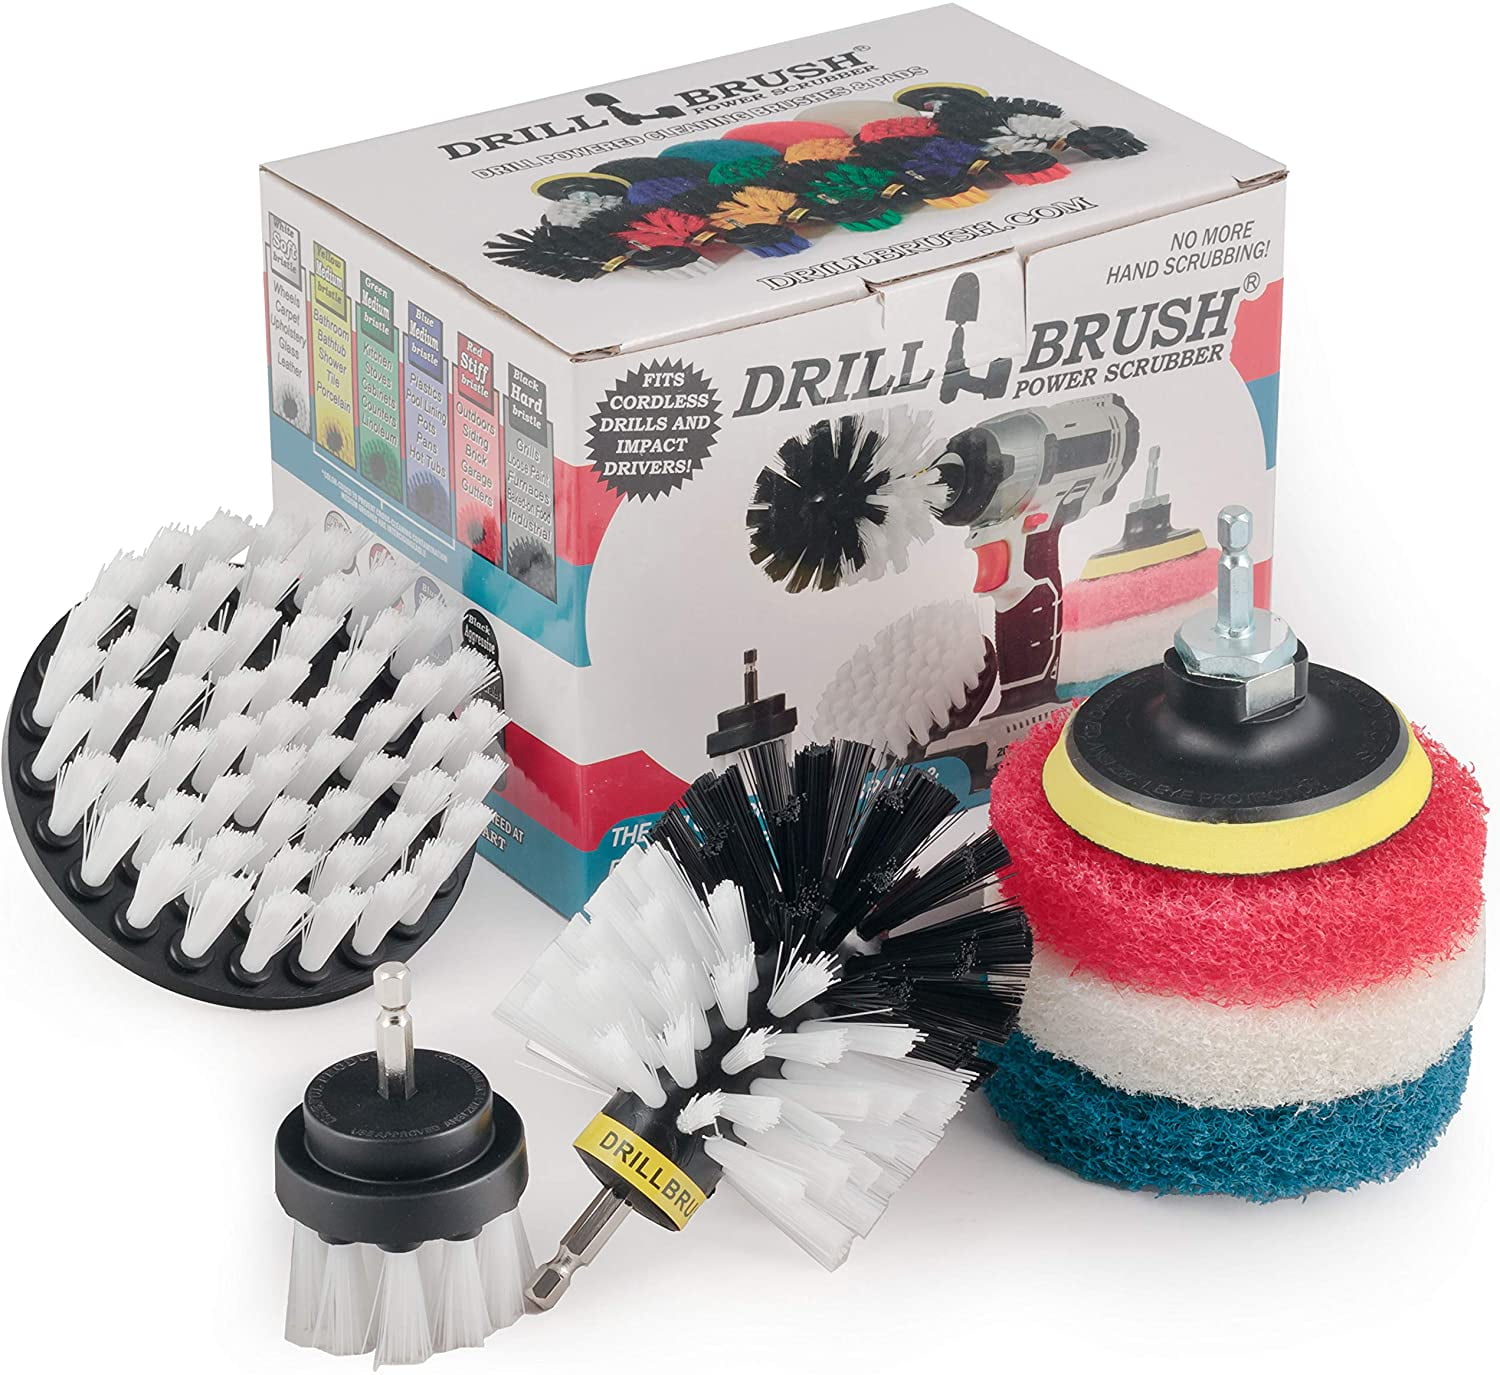 Submersible Drill Brush Set (includes all 4 Brushes) - Nemo Power